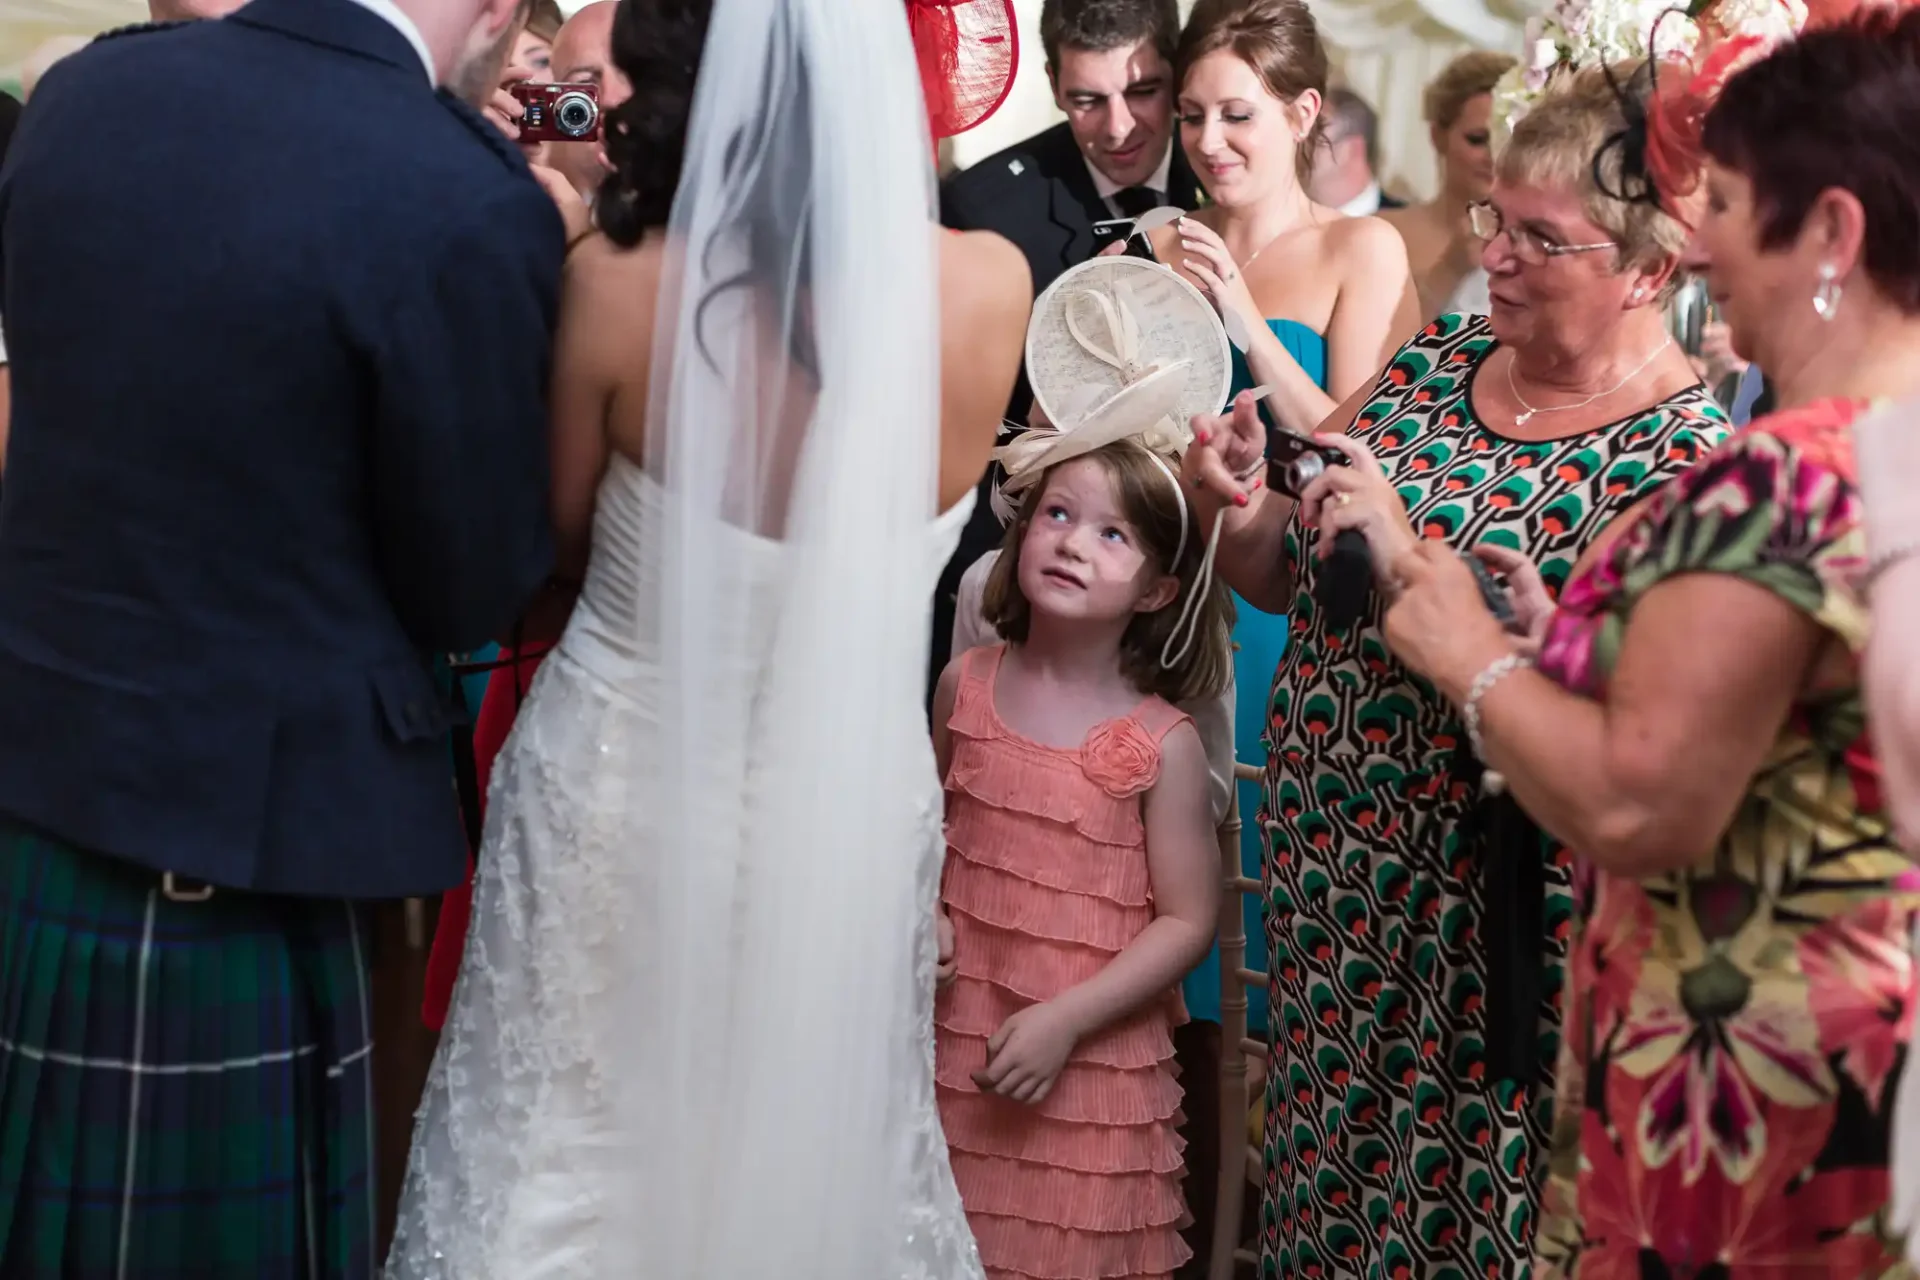 A young girl in an orange dress looking up curiously at a bride in a white gown surrounded by guests at a wedding.